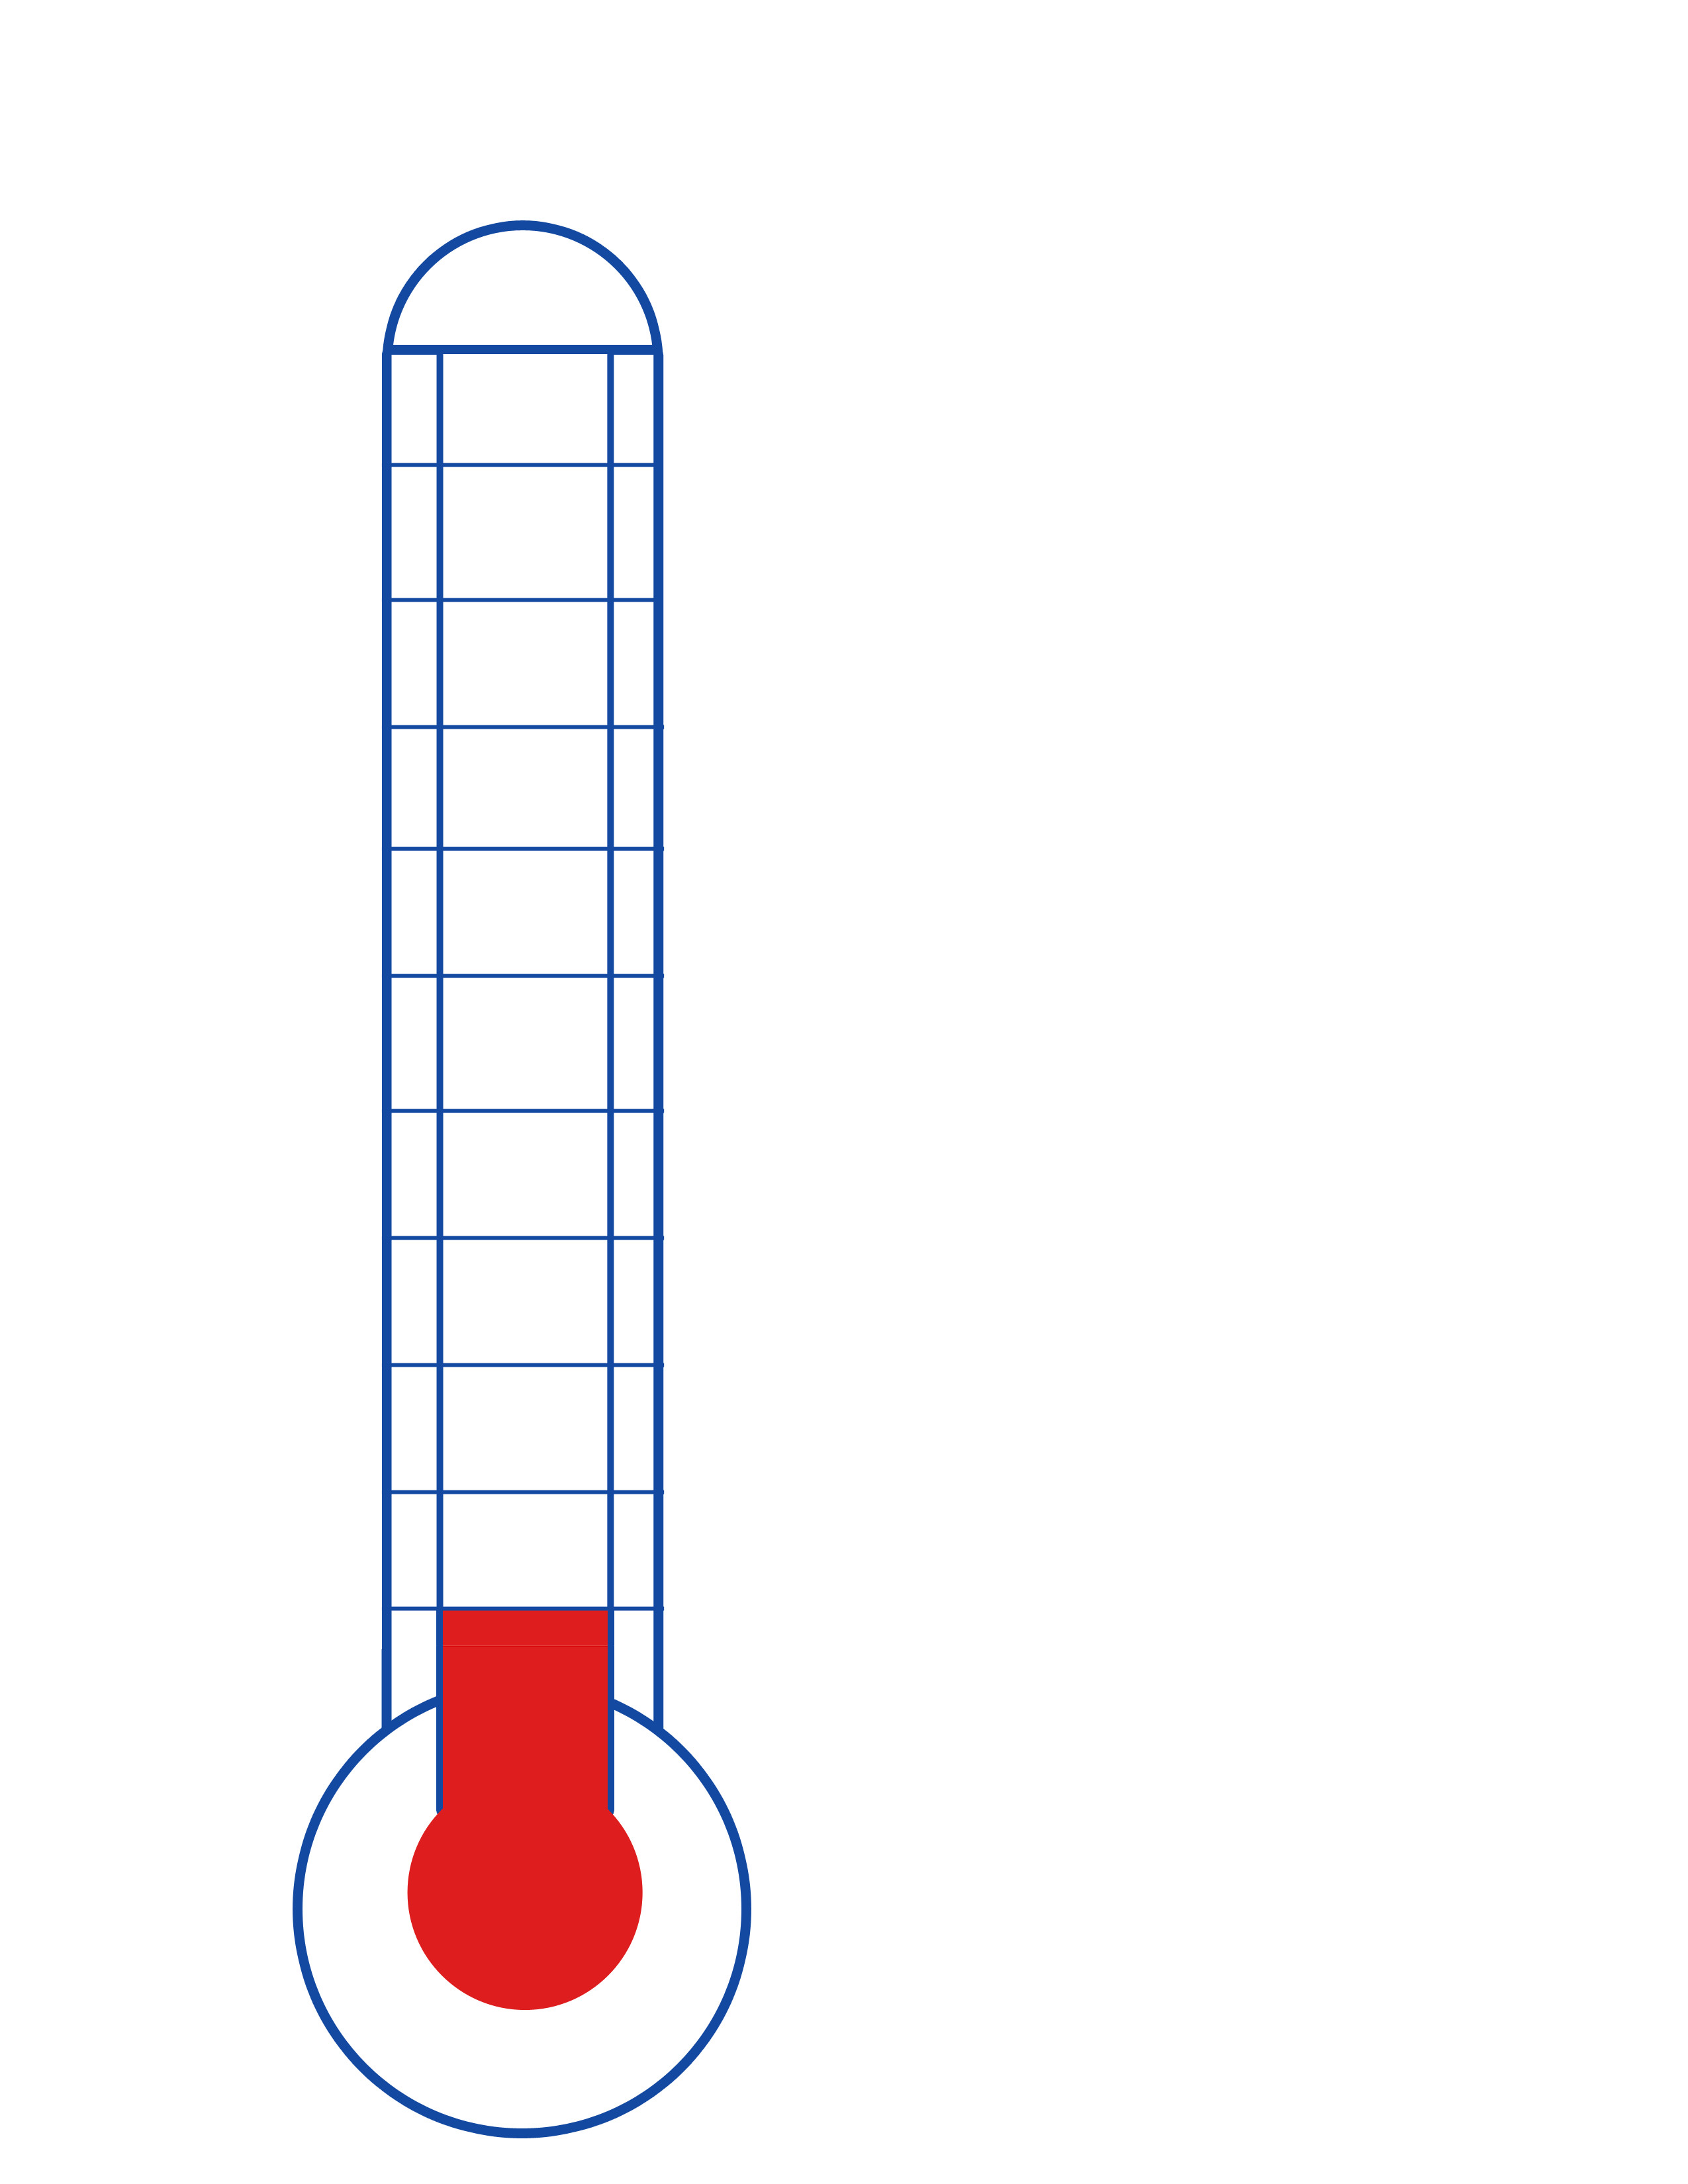 fundraising thermometer template